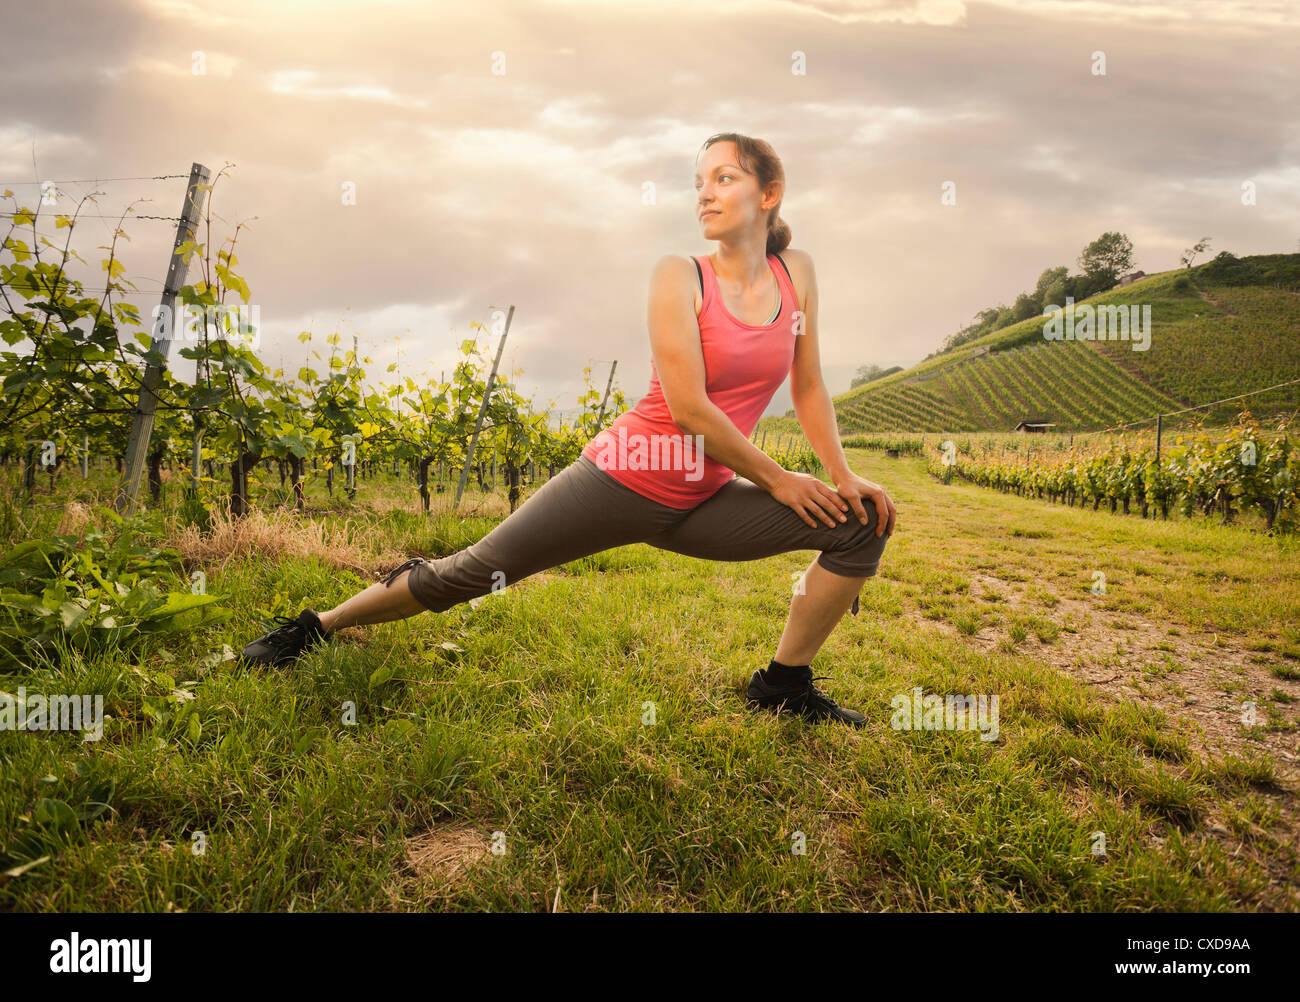 Caucasian woman stretching in vineyard Banque D'Images